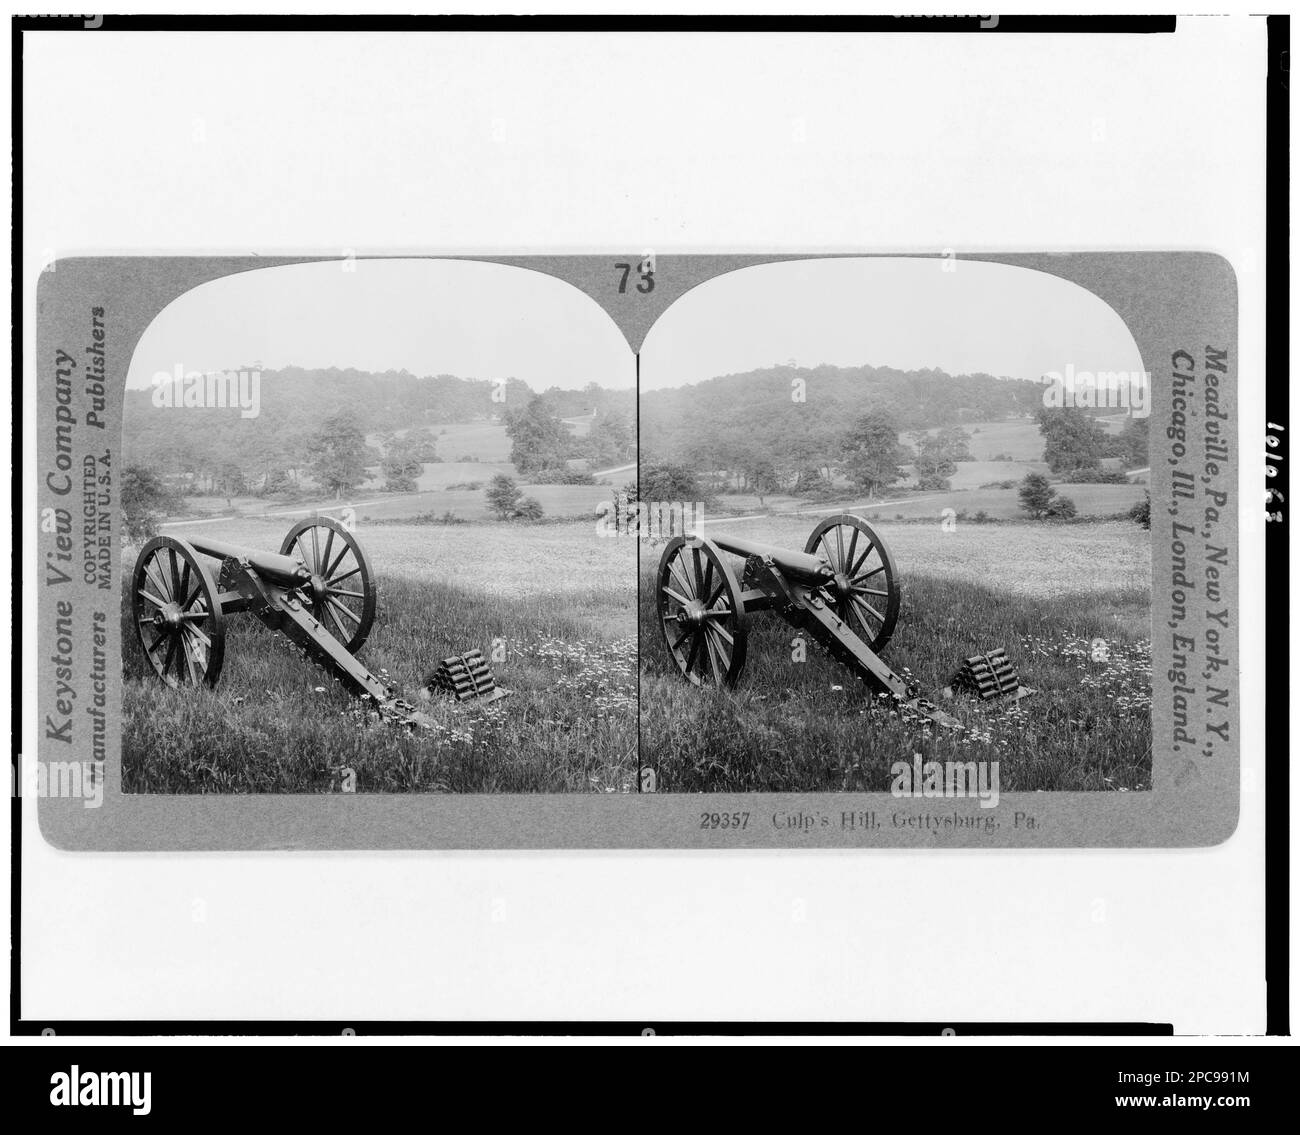 Culp's Hill, Gettysburg, Pa.. No renewal in Copyright office. J293435 U.S. Copyright Office, No. 29357. Cannons, Pennsylvania, Gettysburg, 1920-1930, United States, History, Civil War, 1861-1865, Battlefields. Stock Photo